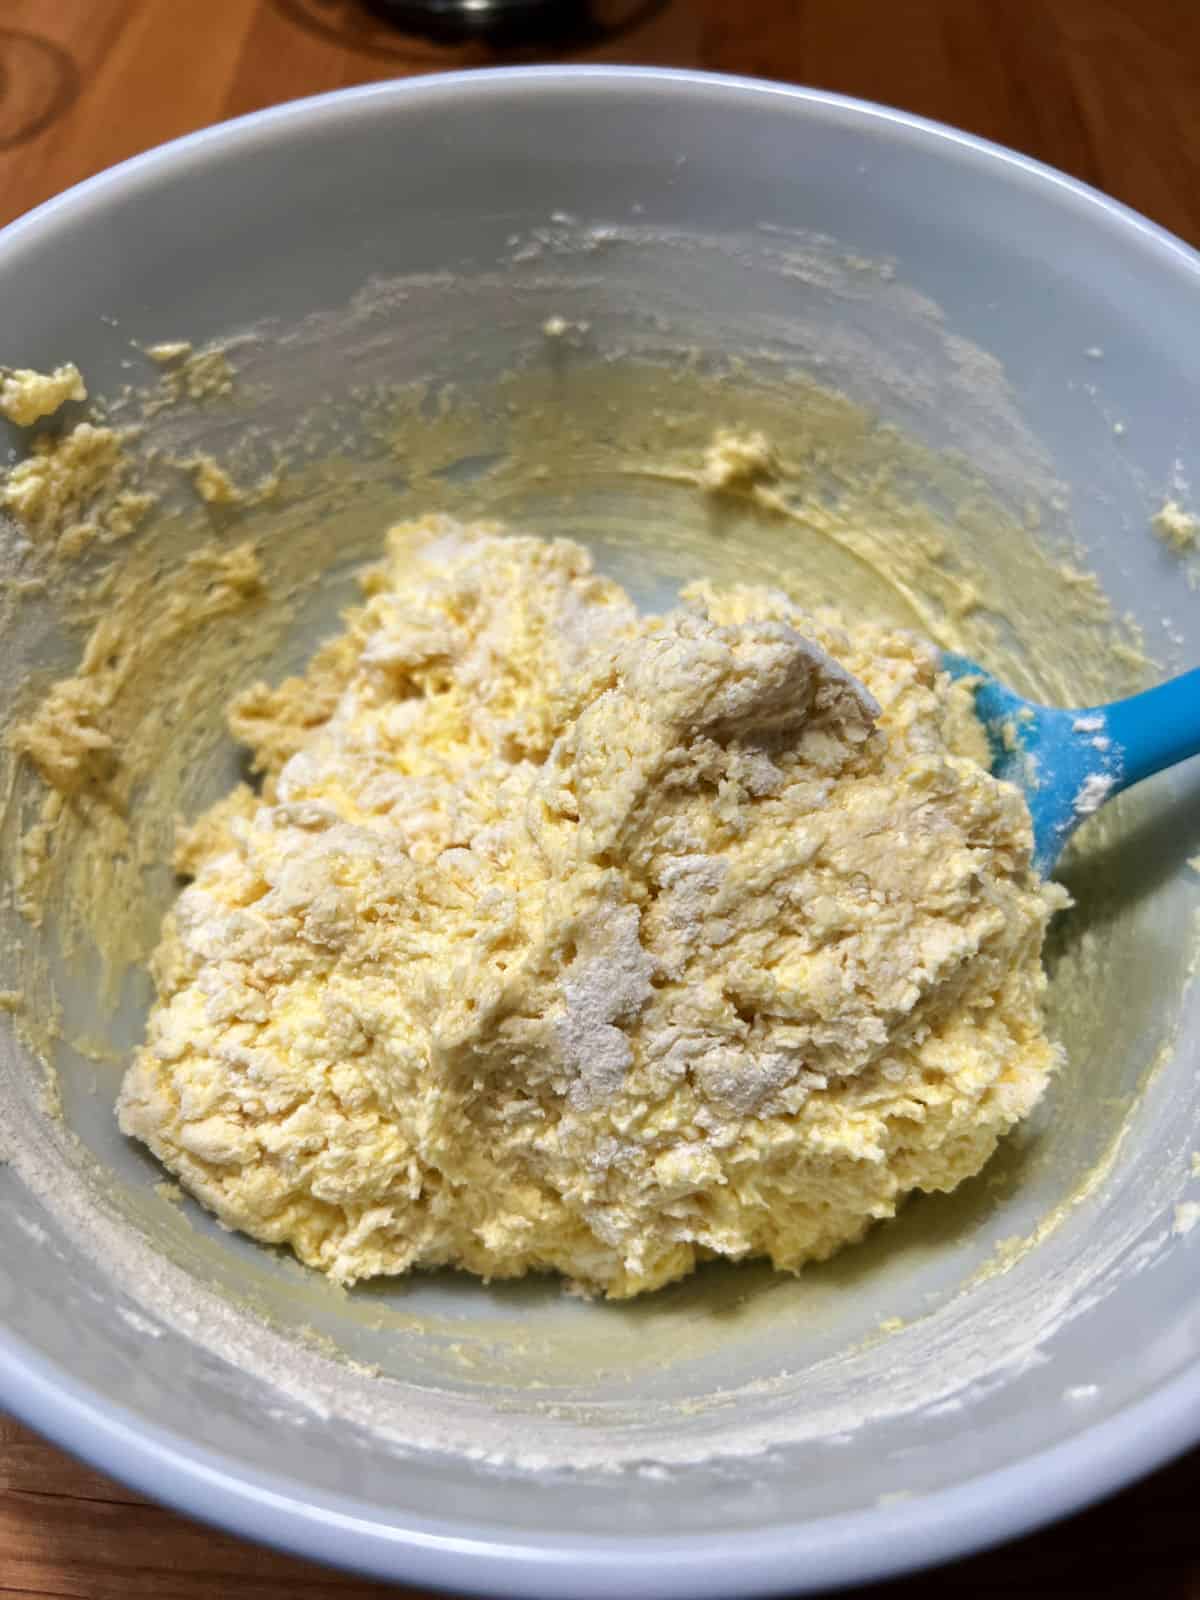 Muffin batter stirred to just combine the dry ingredients with the wet.